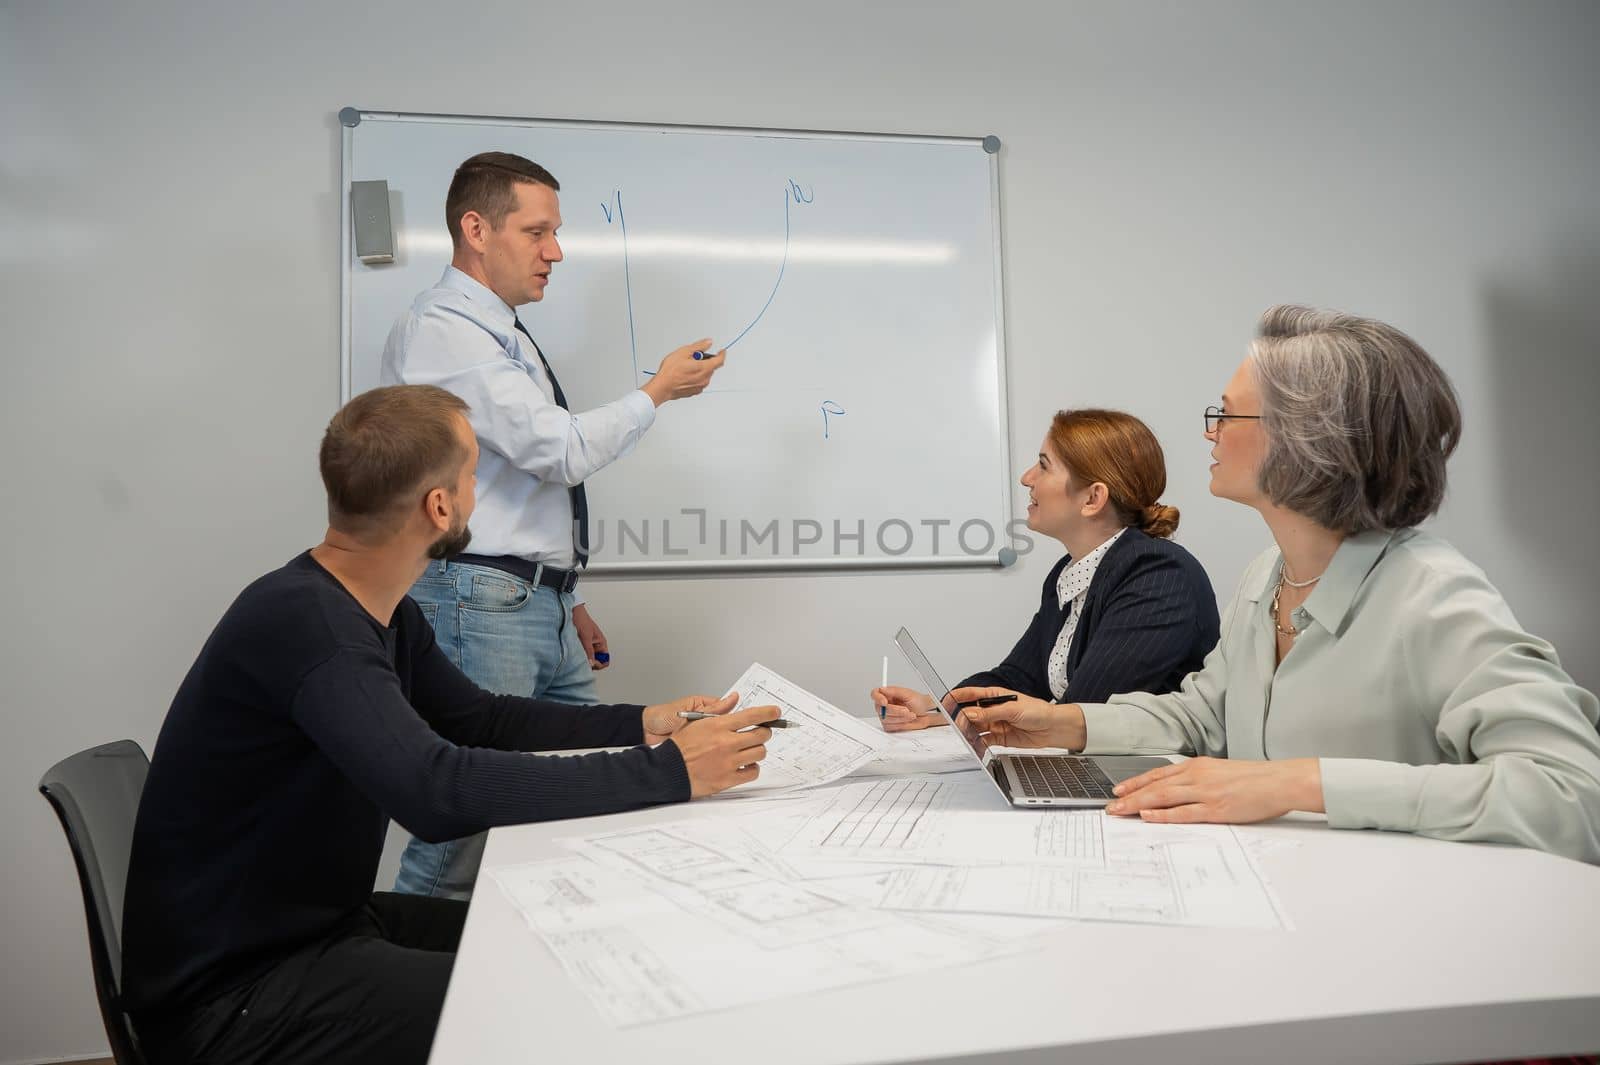 Caucasian man leading a presentation to colleagues at a white board. by mrwed54